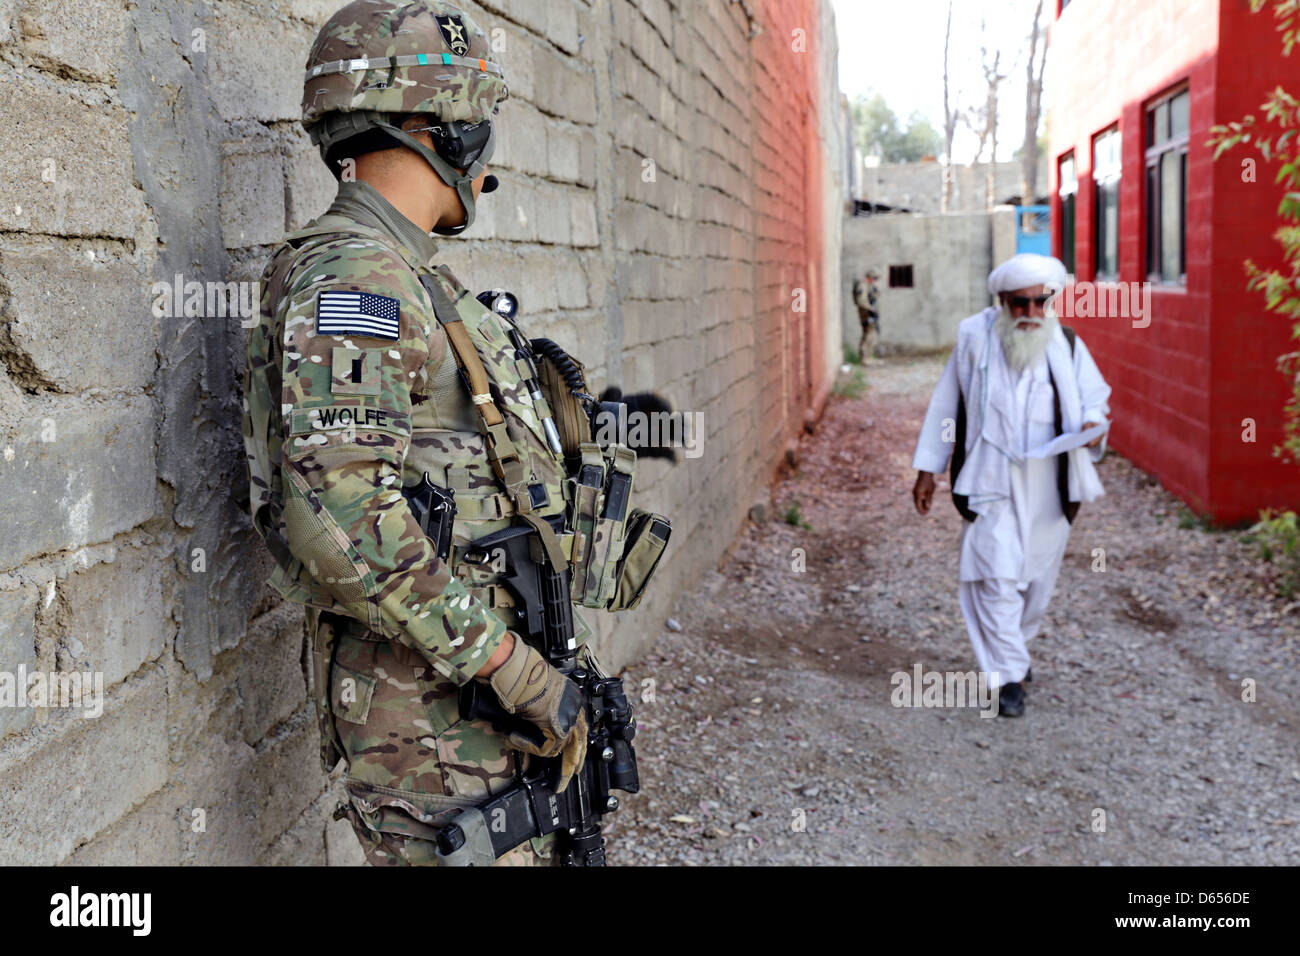 A US Army soldier assigned to the Farah Provincial Reconstruction Team security force watches an elderly Afghan man walk down an alley April 10, 2013 in Farah city, Farah province, Afghanistan. Stock Photo